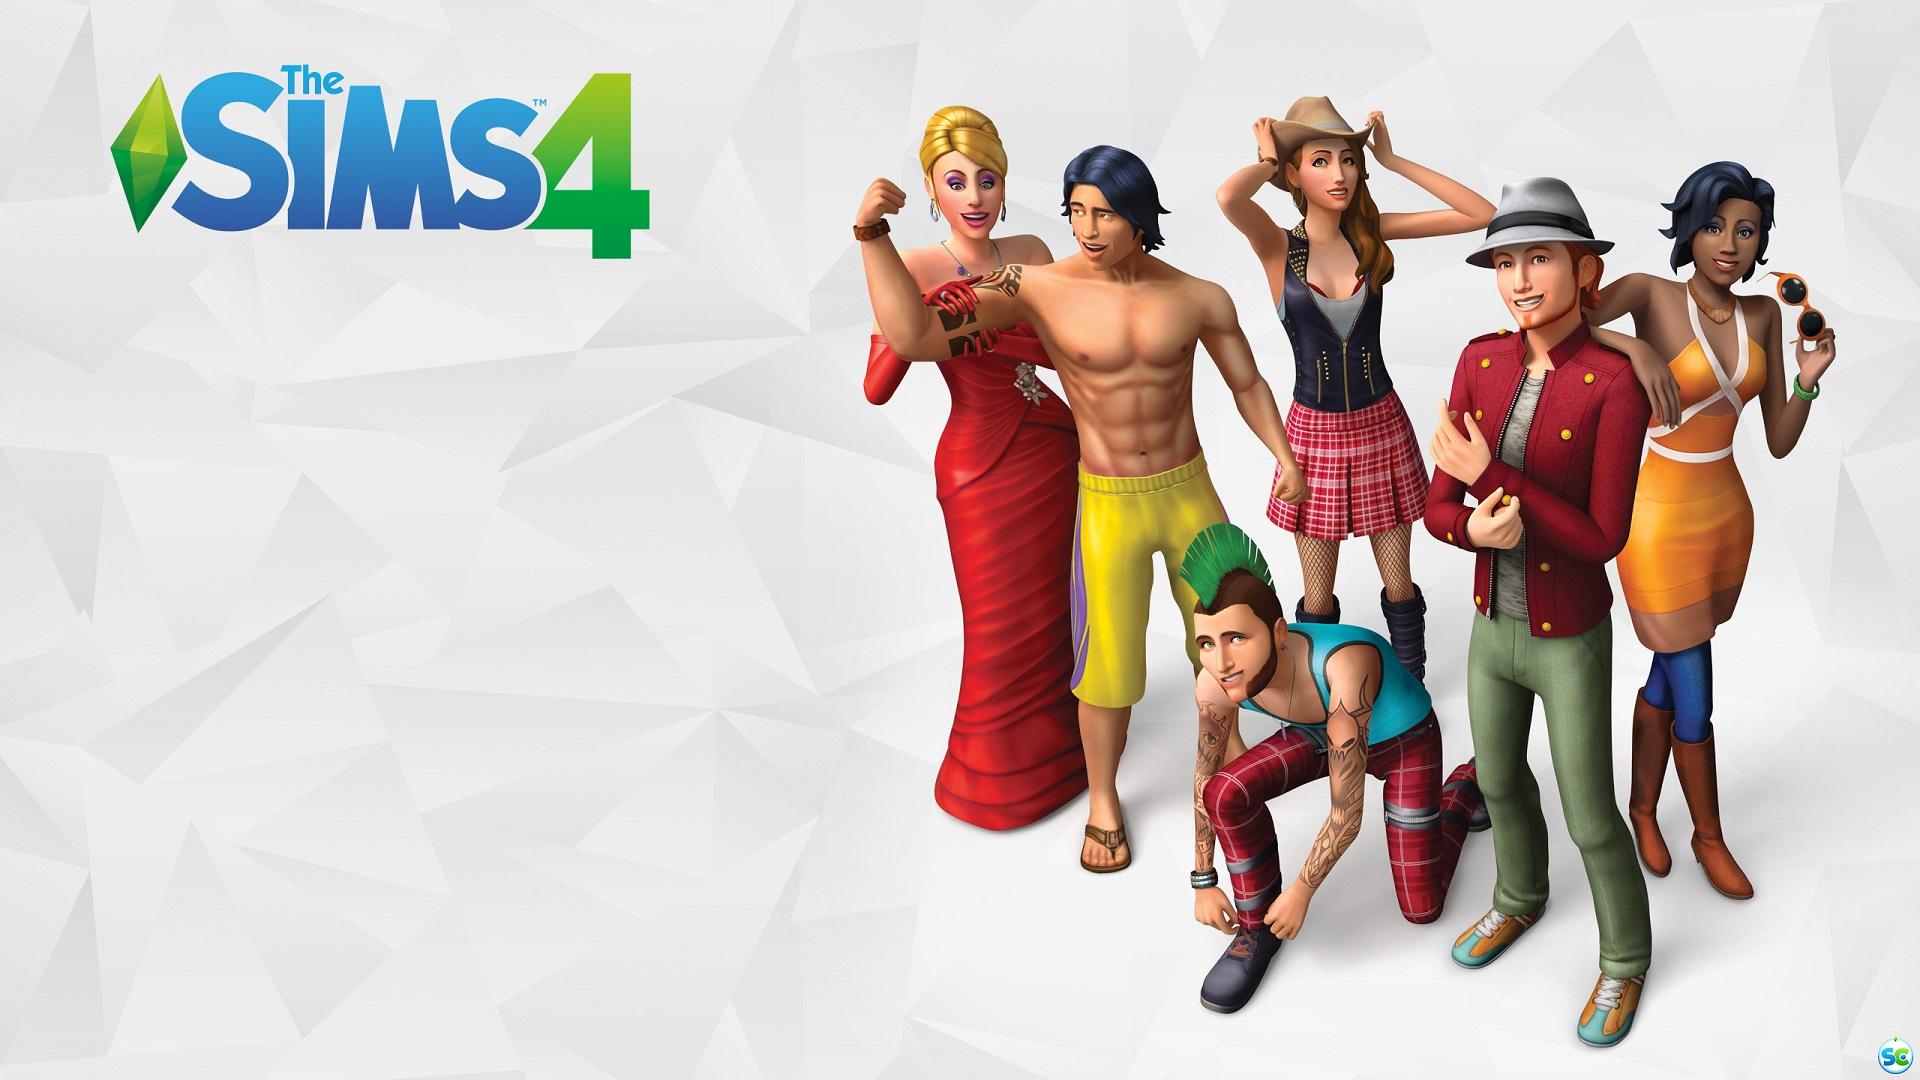 Sims 4 steam price фото 83